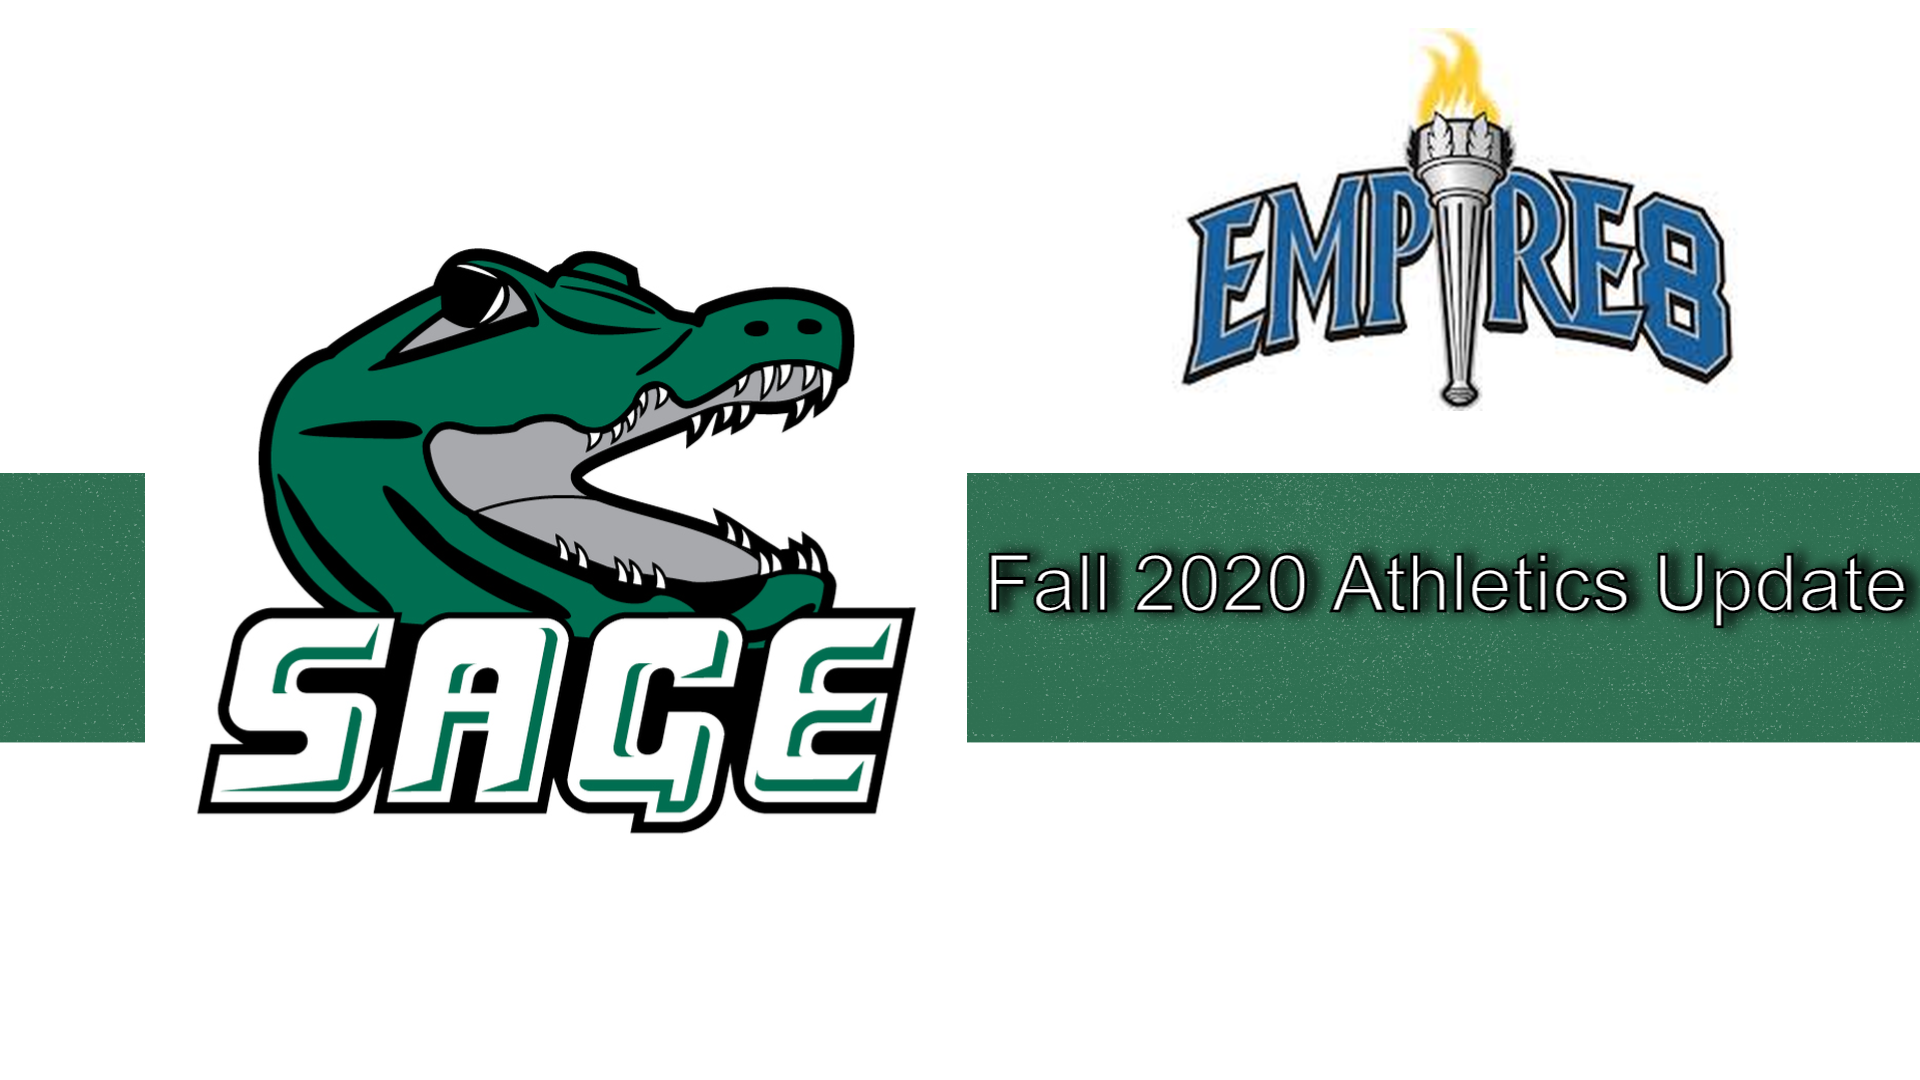 SAGE ATHLETIC TEAMS TO CHANGE FALL OF 2020 PLANS